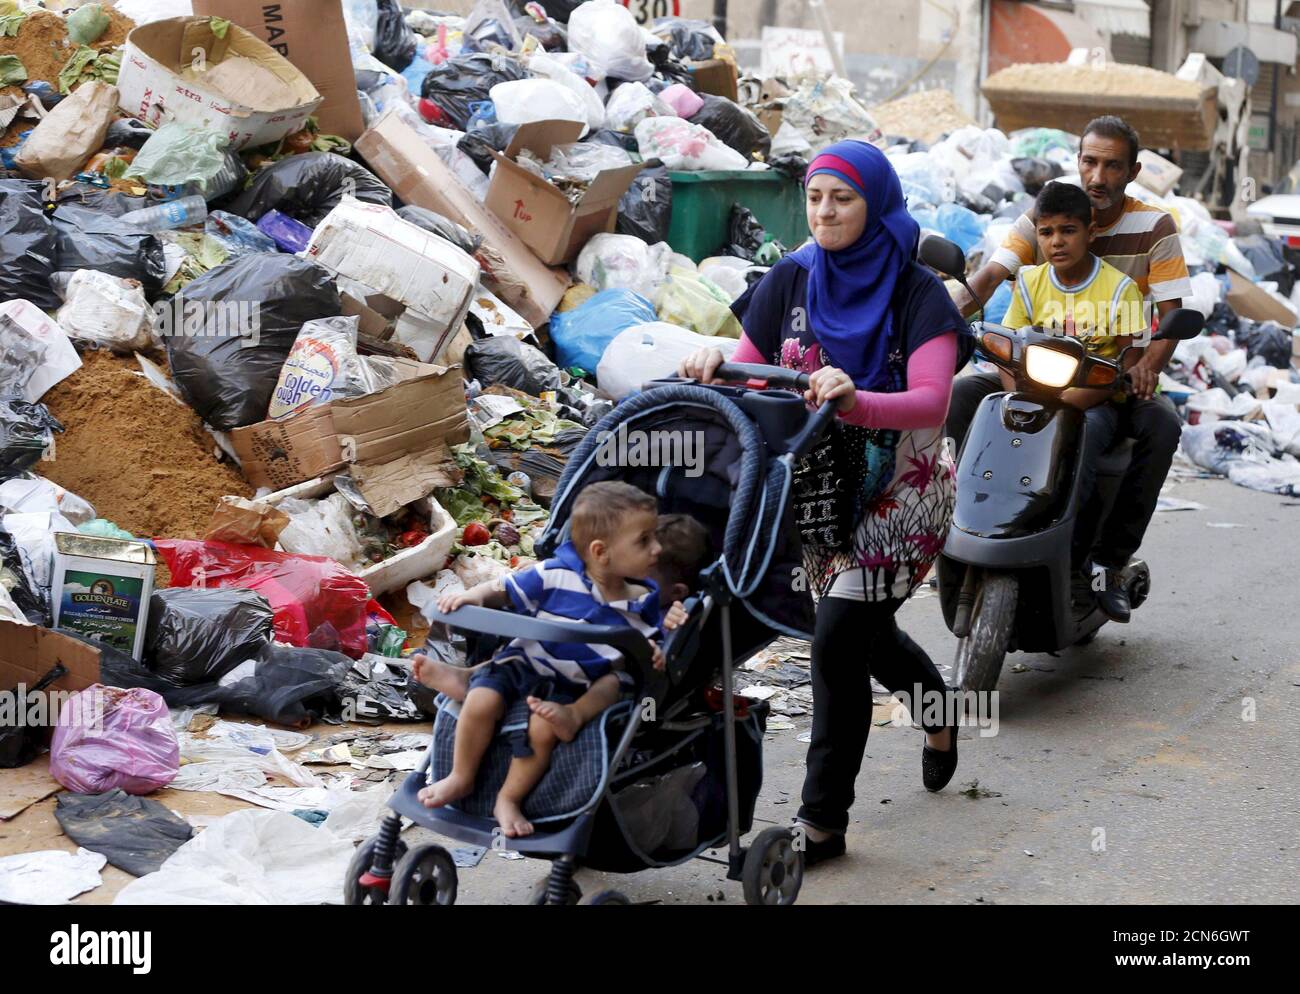 A woman pushes a stroller as other people ride on a scooter past garbage  piled up along a street in Beirut, Lebanon August 26, 2015. The powerful  Shi'ite party Hezbollah and its